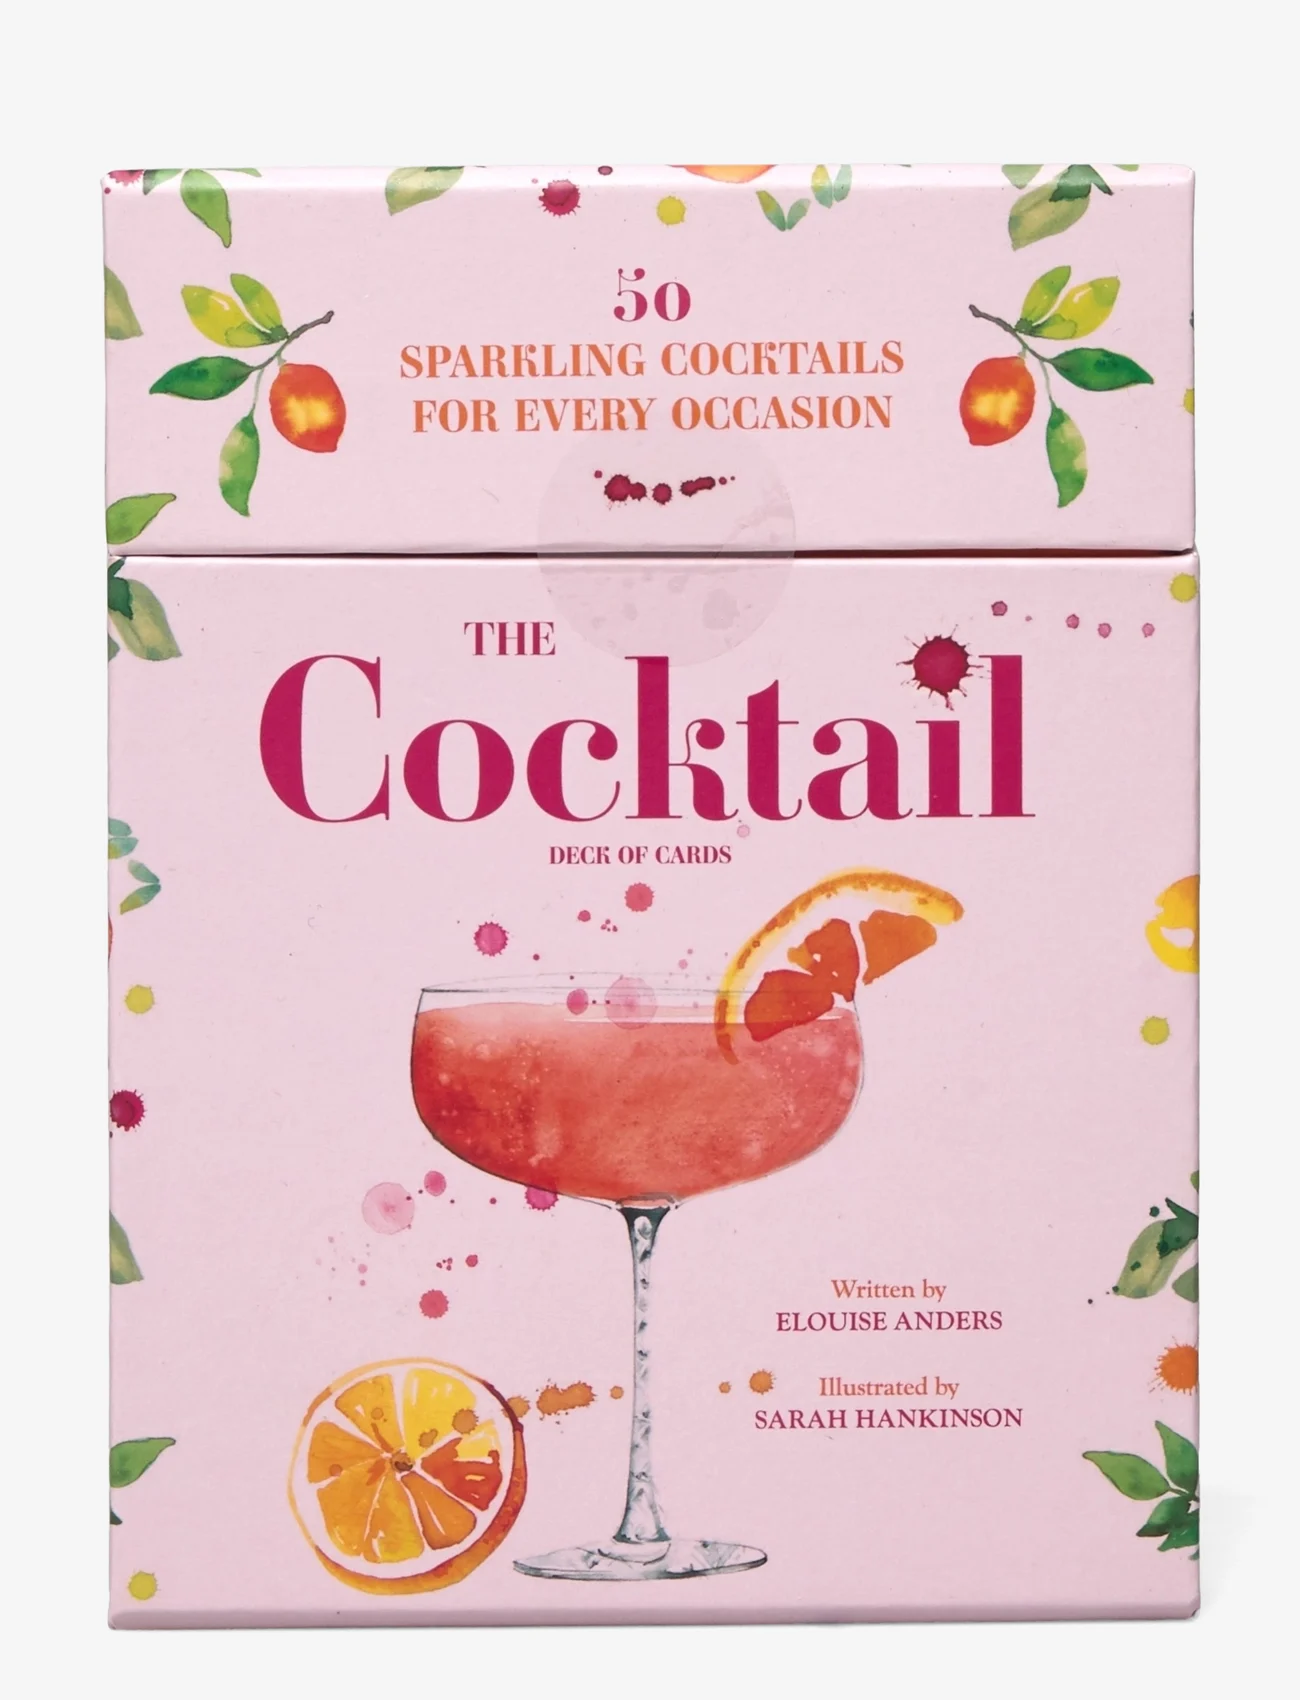 New Mags - The Cocktail Deck of Cards - lowest prices - pink - 0